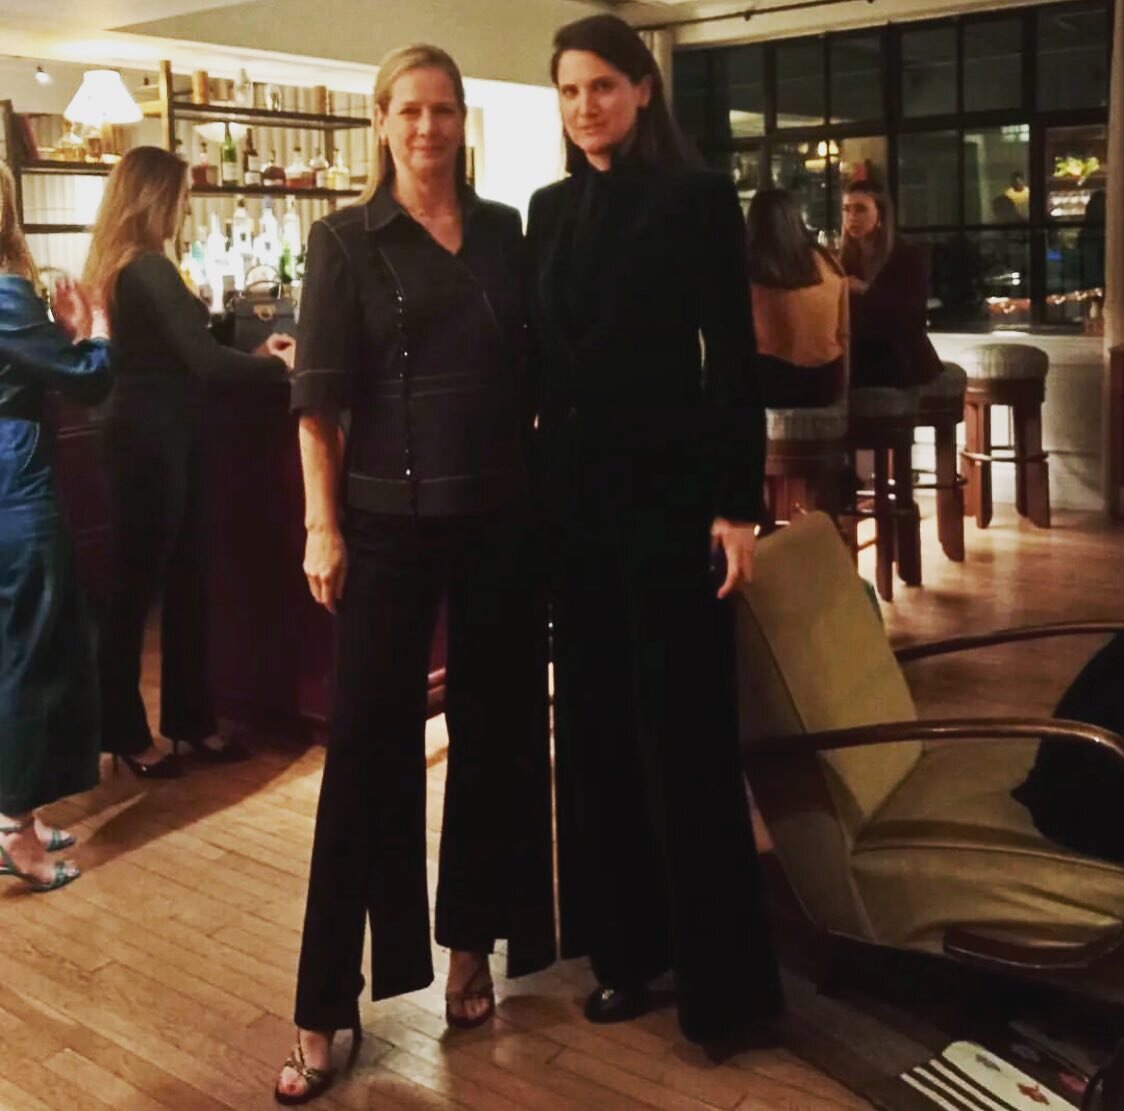 Last night I spoke with Davina Catt at a screening of Salvatore: Shoemaker of Dreams, a documentary I wrote for Luca Guadagnino about Salvatore Ferragamo, at the Fashion and Cinema series at Mortimer House in London. Fab fab evening. You can find the